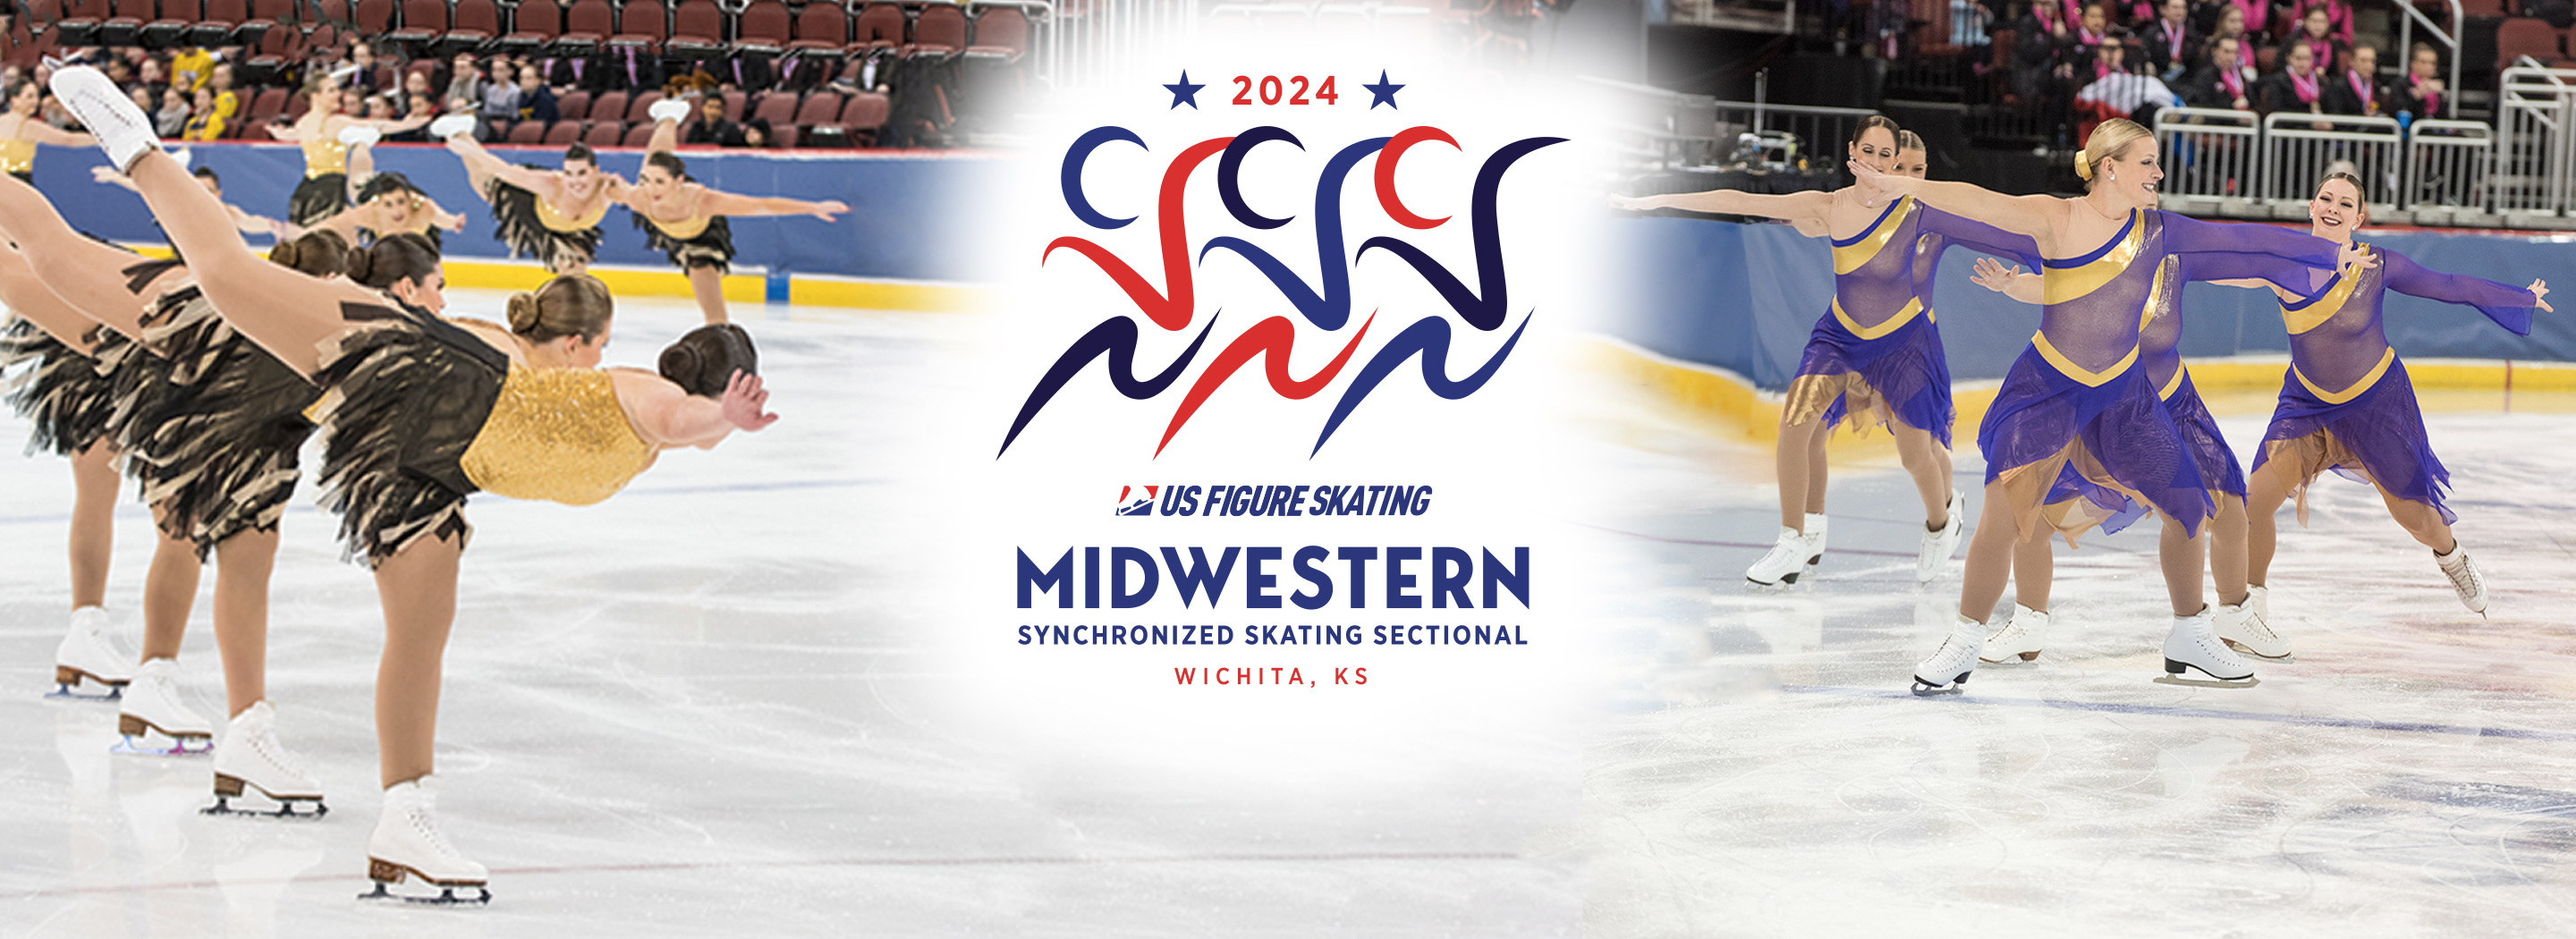 2024 Midwestern Synchronized Skating Sectional Championships  at INTRUST Bank Arena - JAN 24 - 28